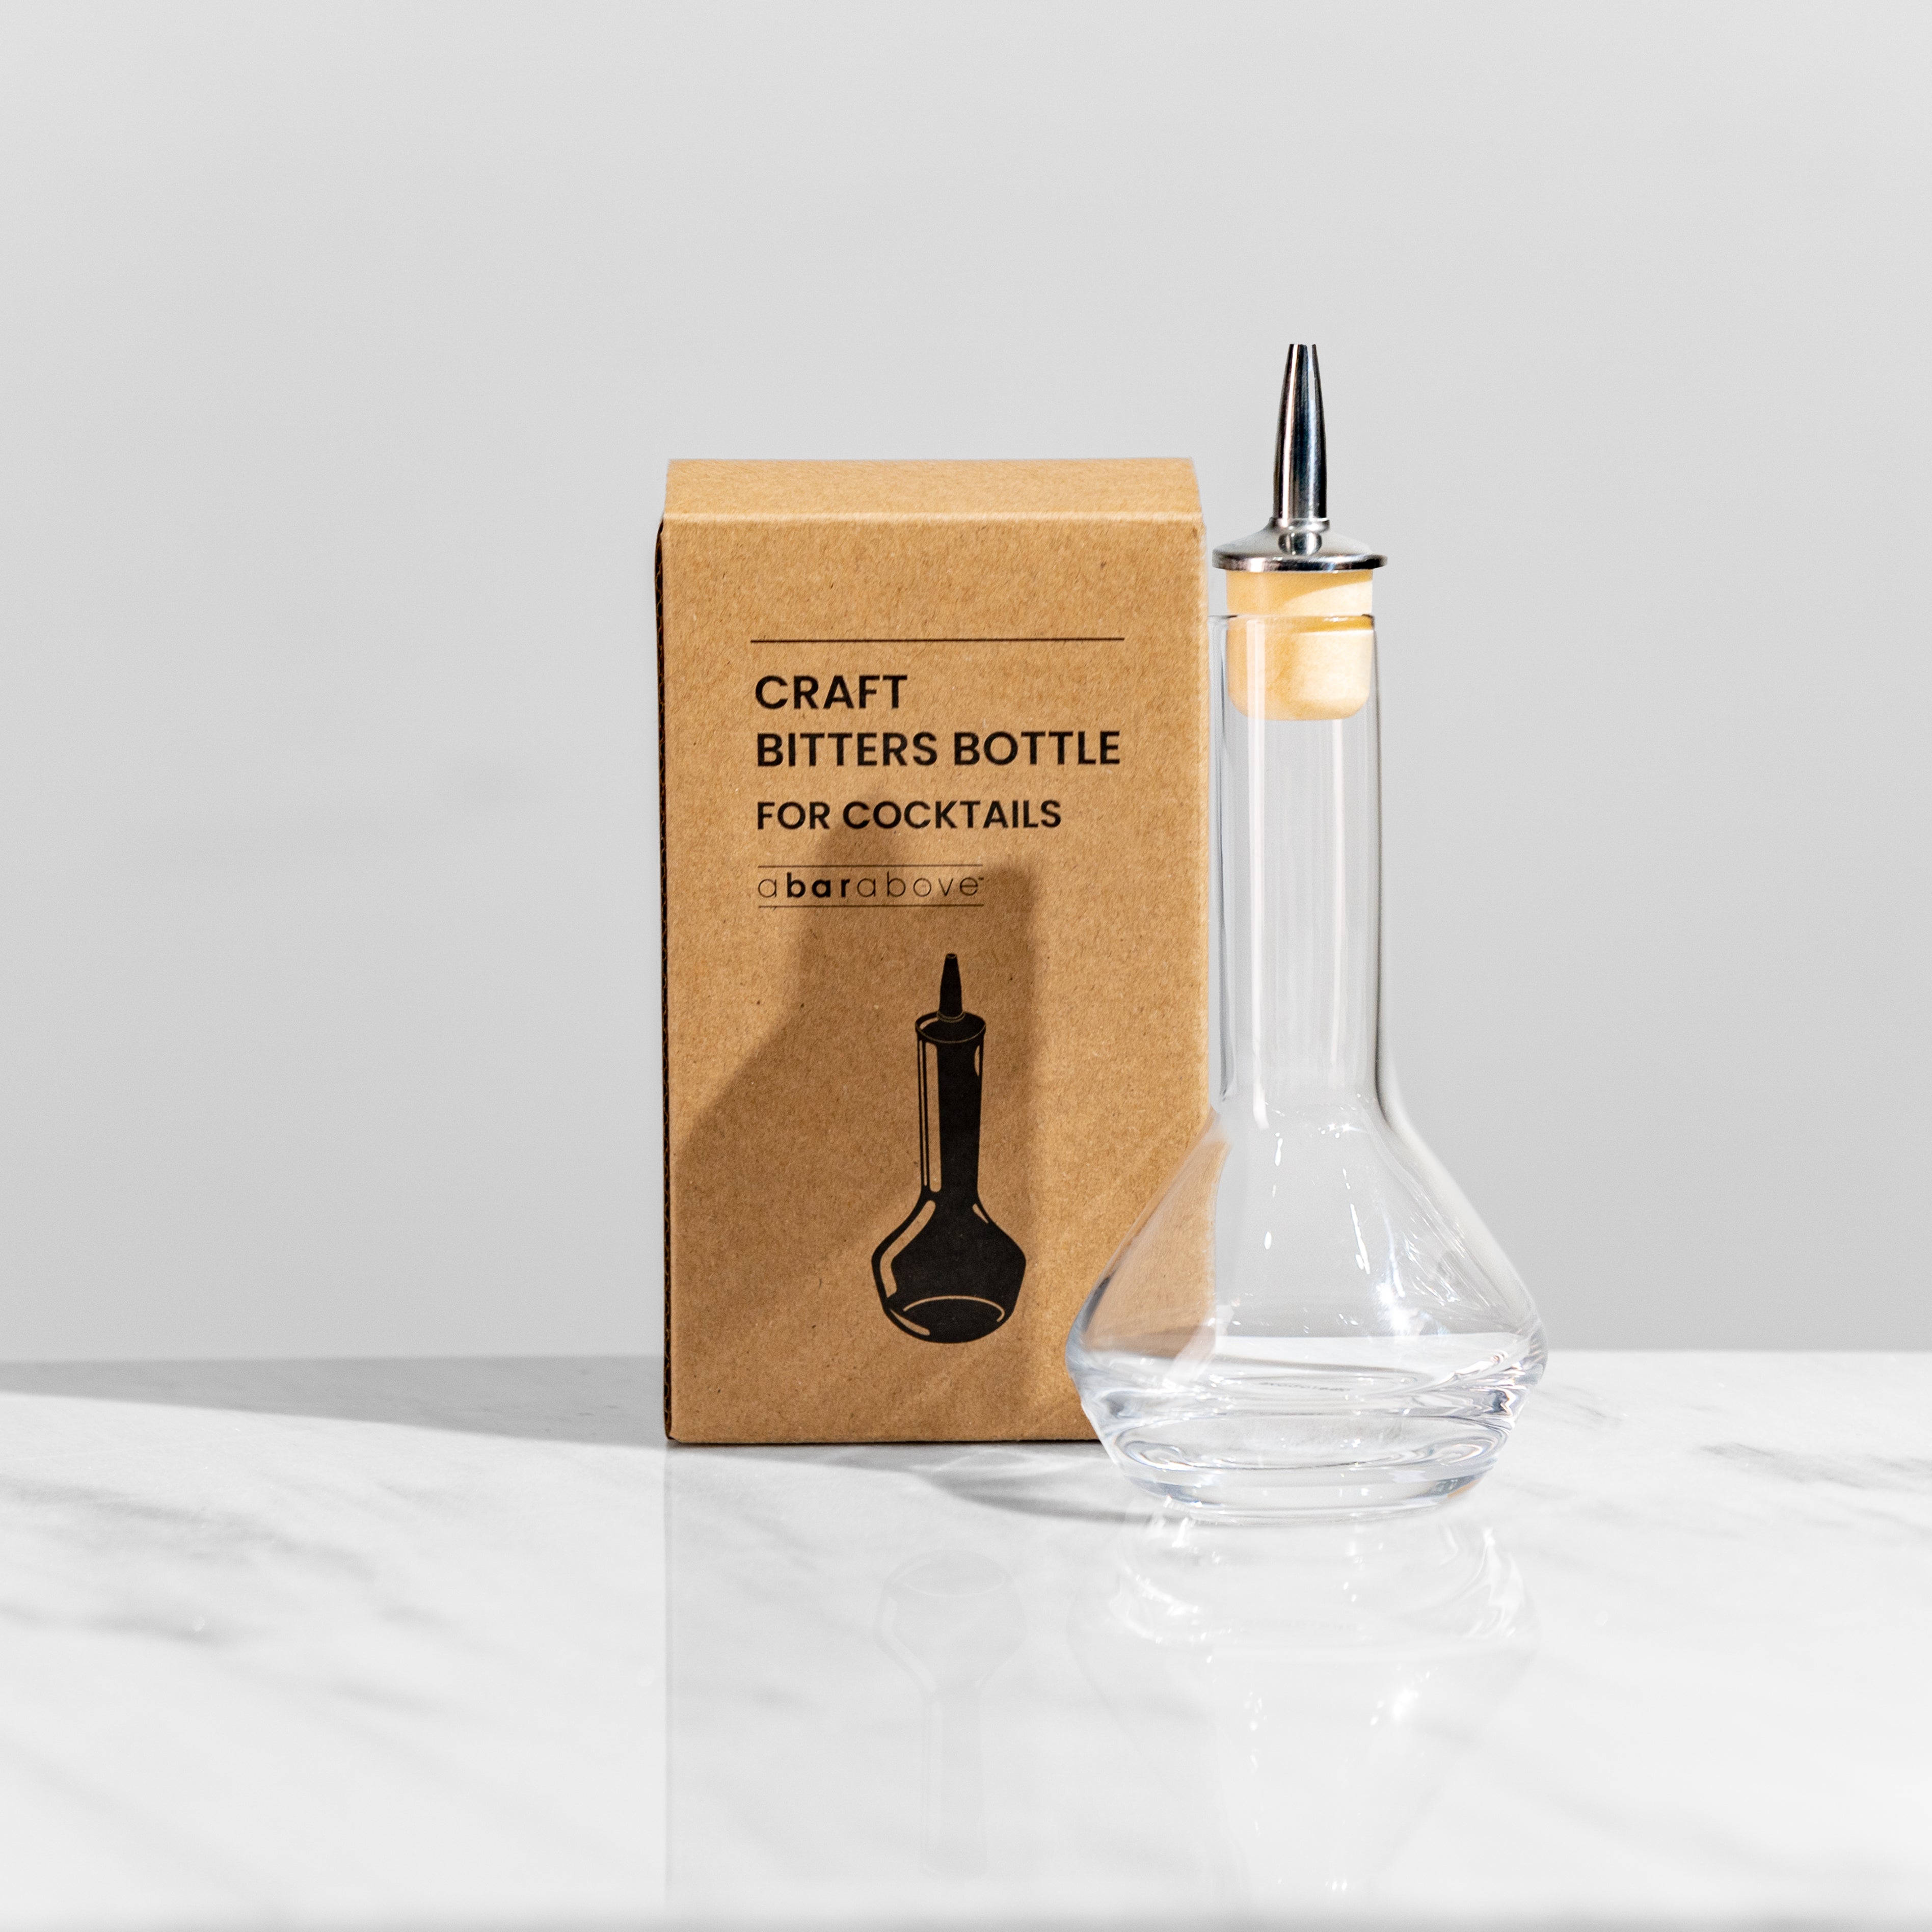 1 clear bitters bottle with rounded bottom on a white marble table, next to its gift box that reads "Craft bitters bottle for cocktails"